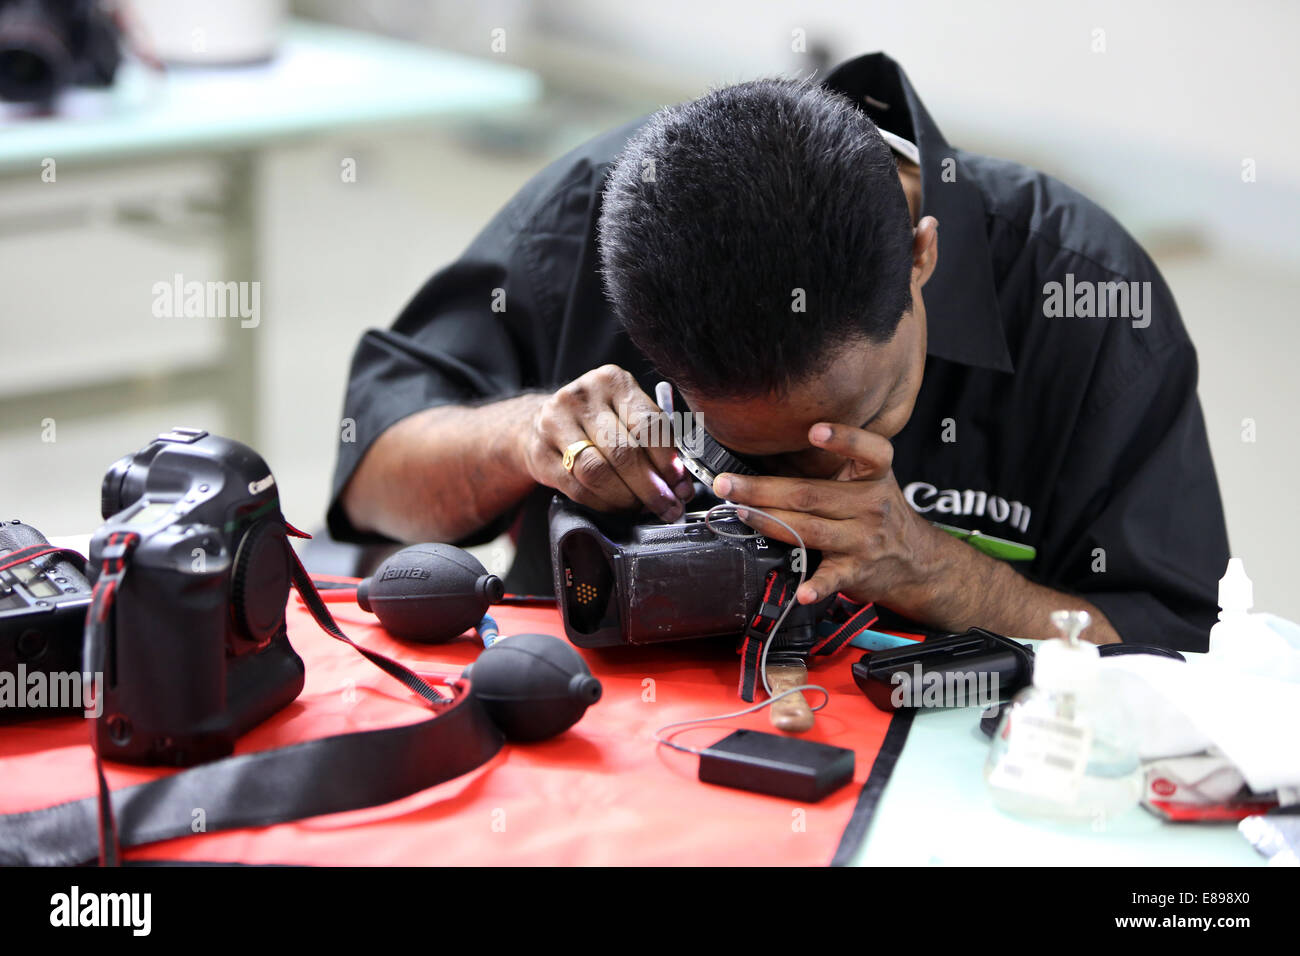 Dubai, United Arab Emirates, an employee of Canon Professional Service cleans an SLR Stock Photo